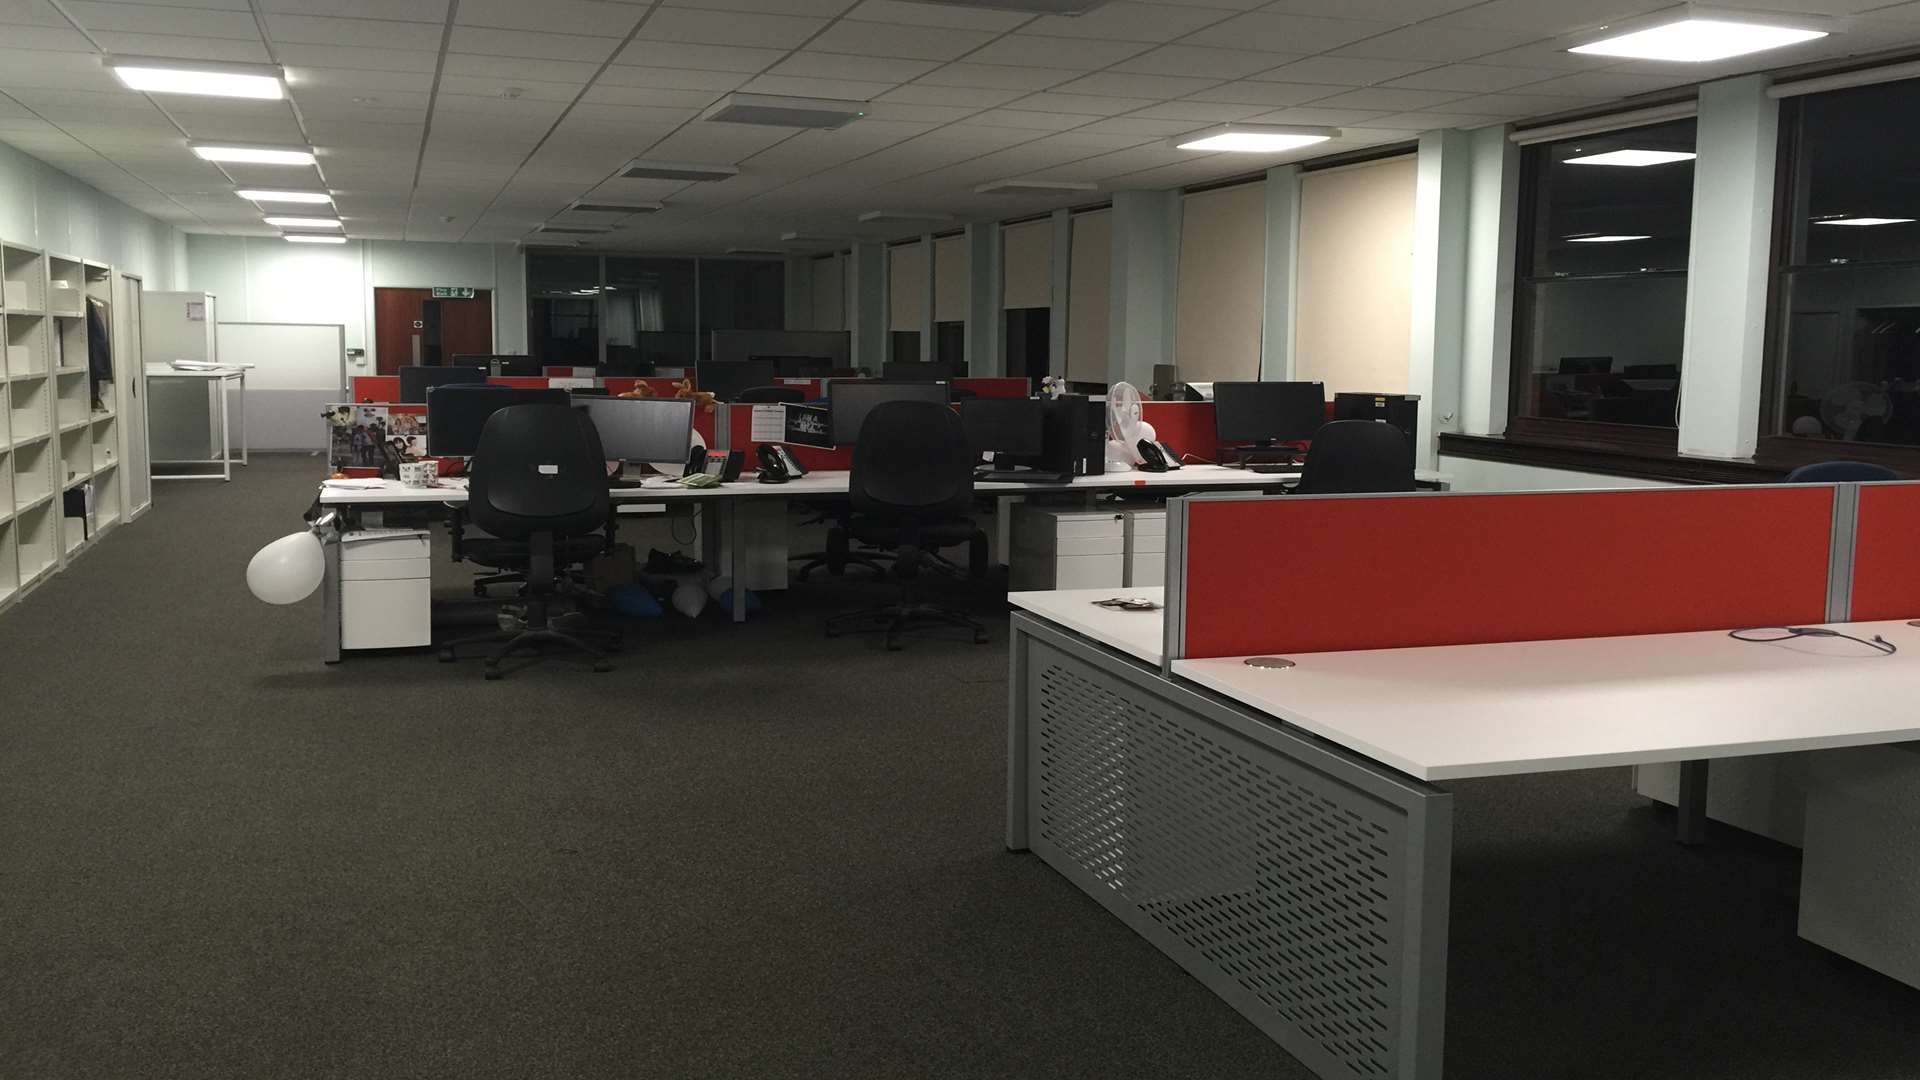 The revamp includes desk space for around 30 staff